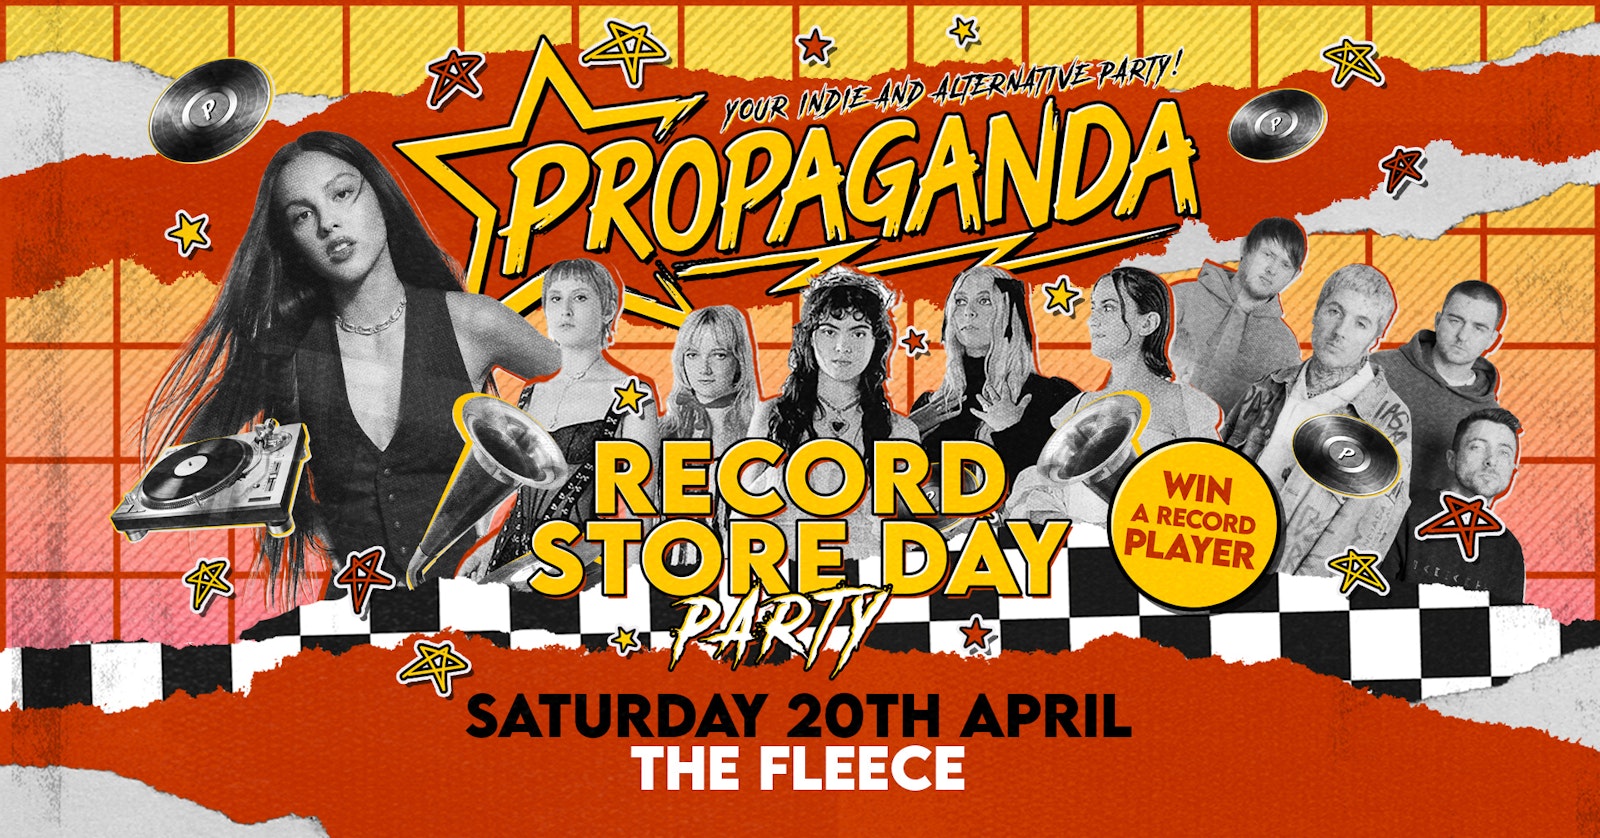 TONIGHT! Propaganda Bristol Record Store Day Party! – Your Indie & Alternative Party!